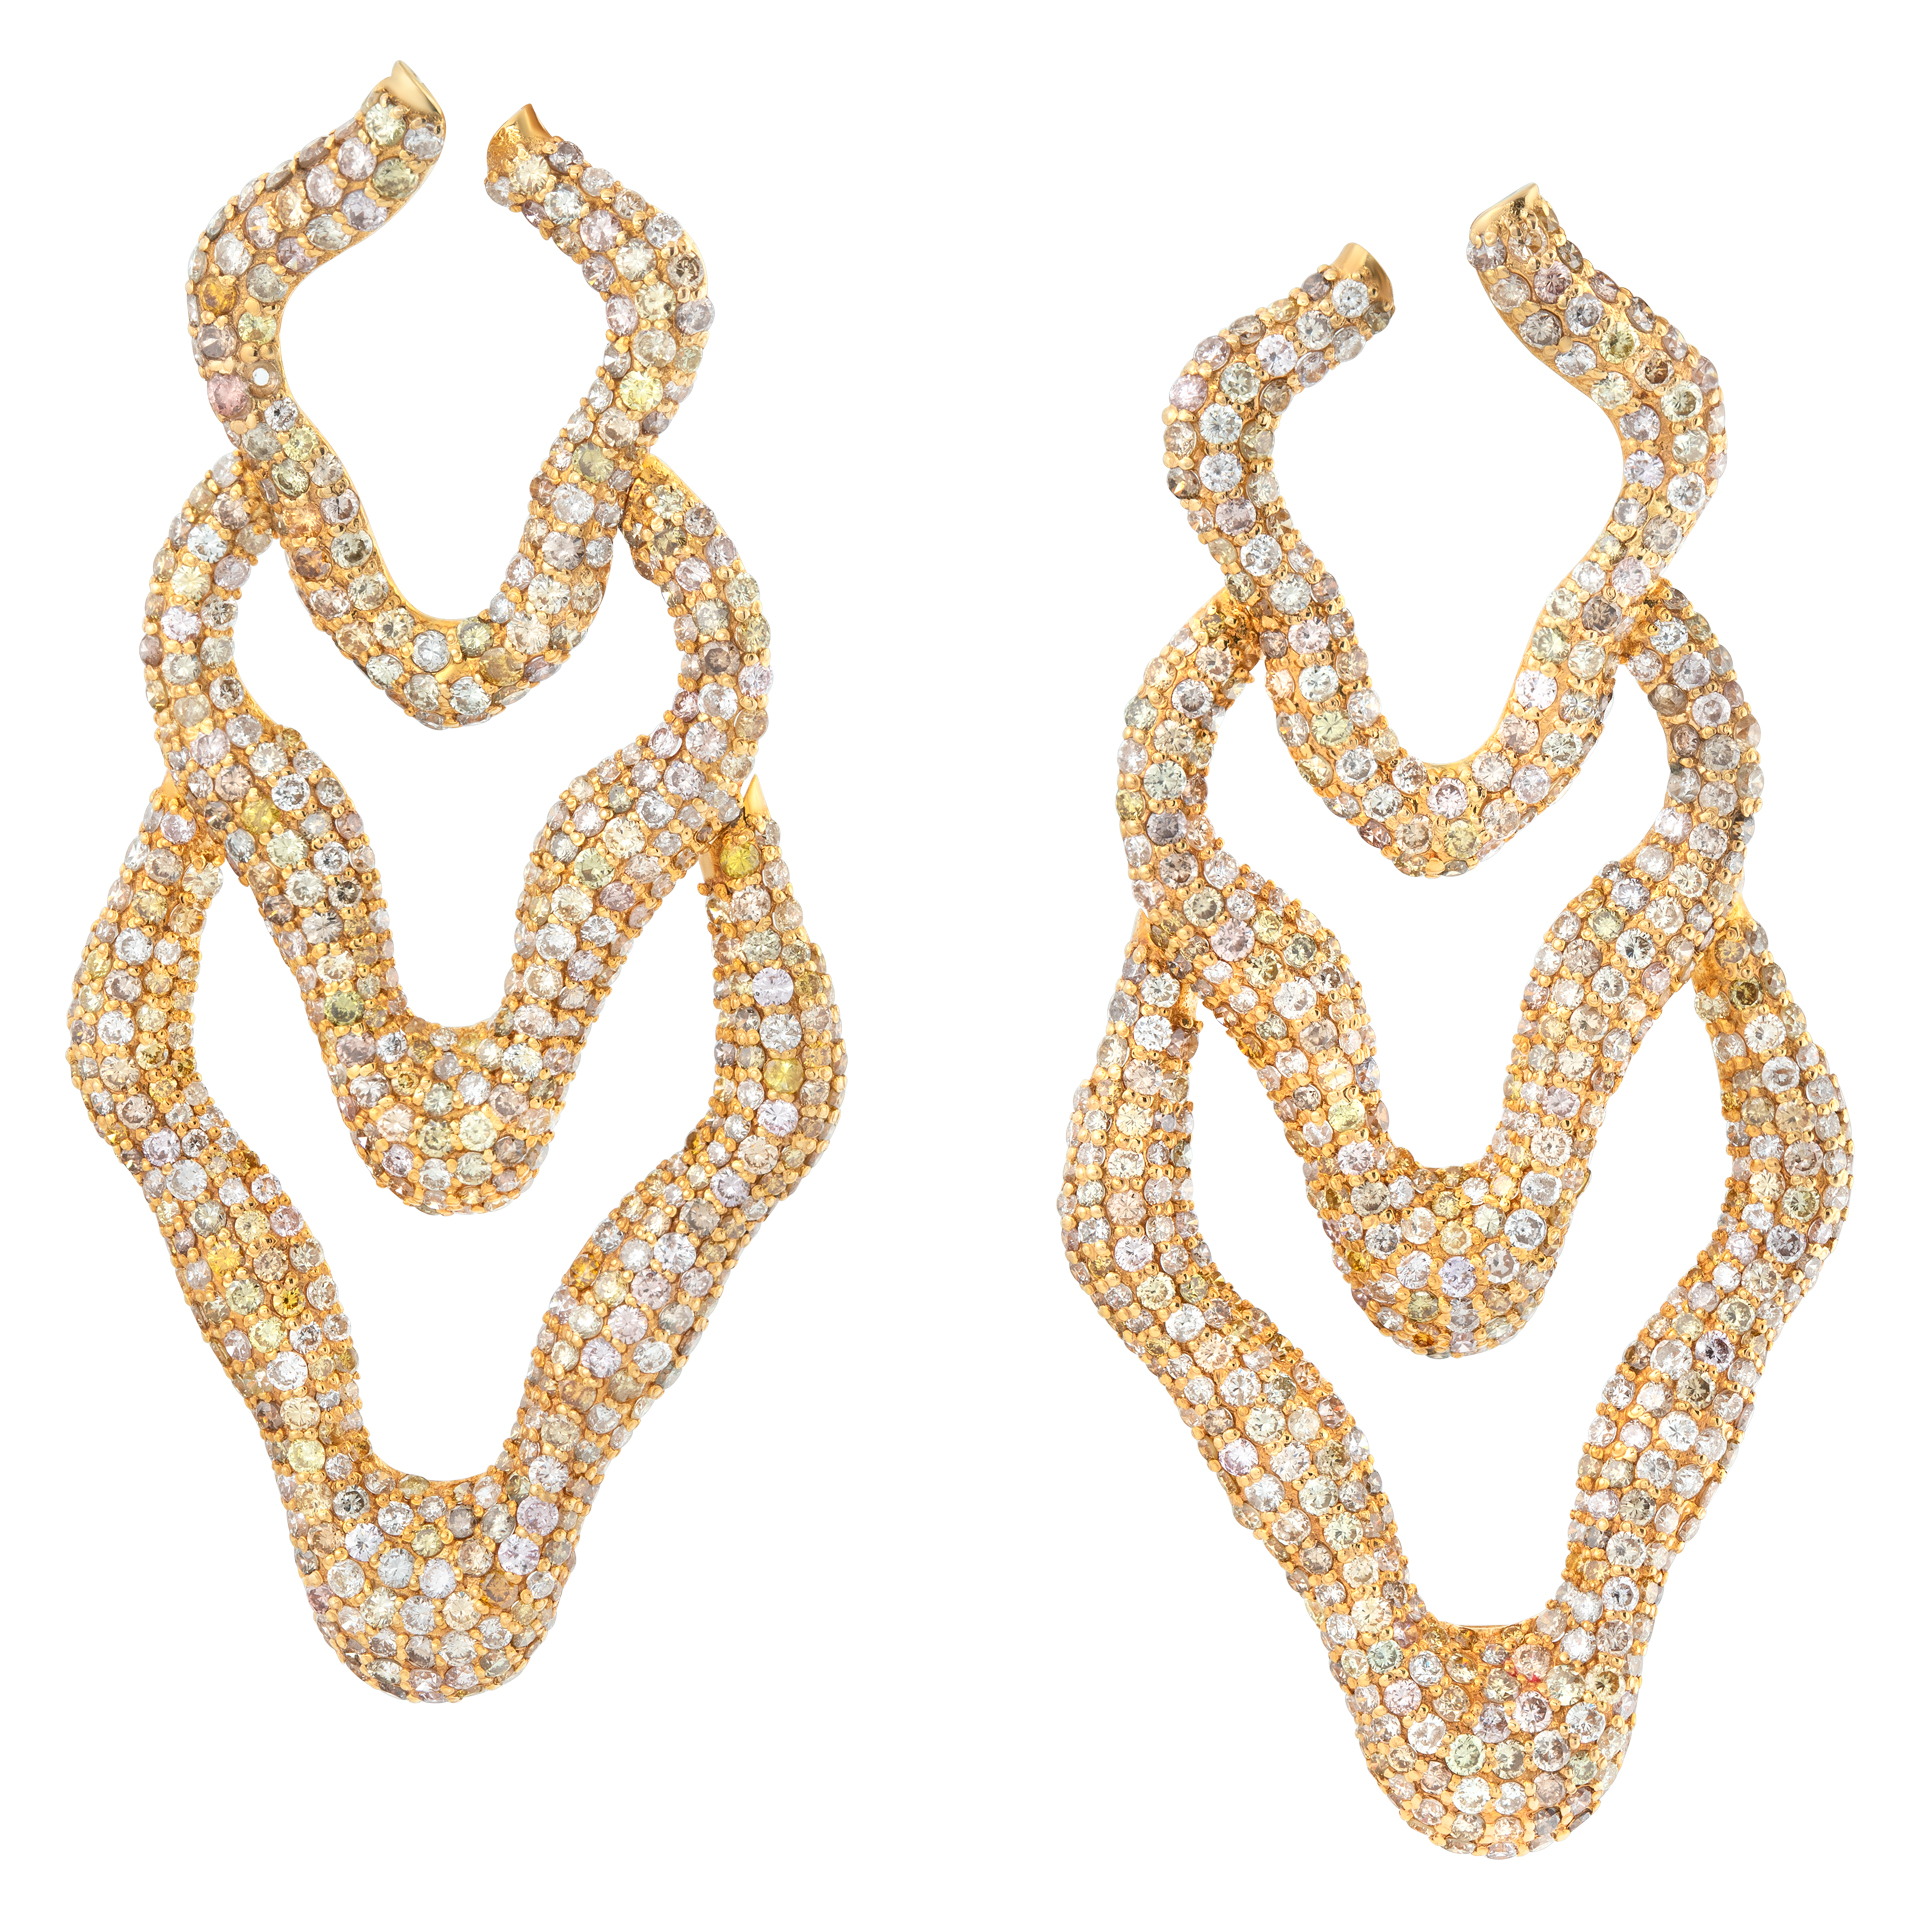 Hanging earrings with white, yellow, and champagne pave diamond set in 18k yellow gold. Round brillliant cut diamonds total approx. weight: 8.50 carats